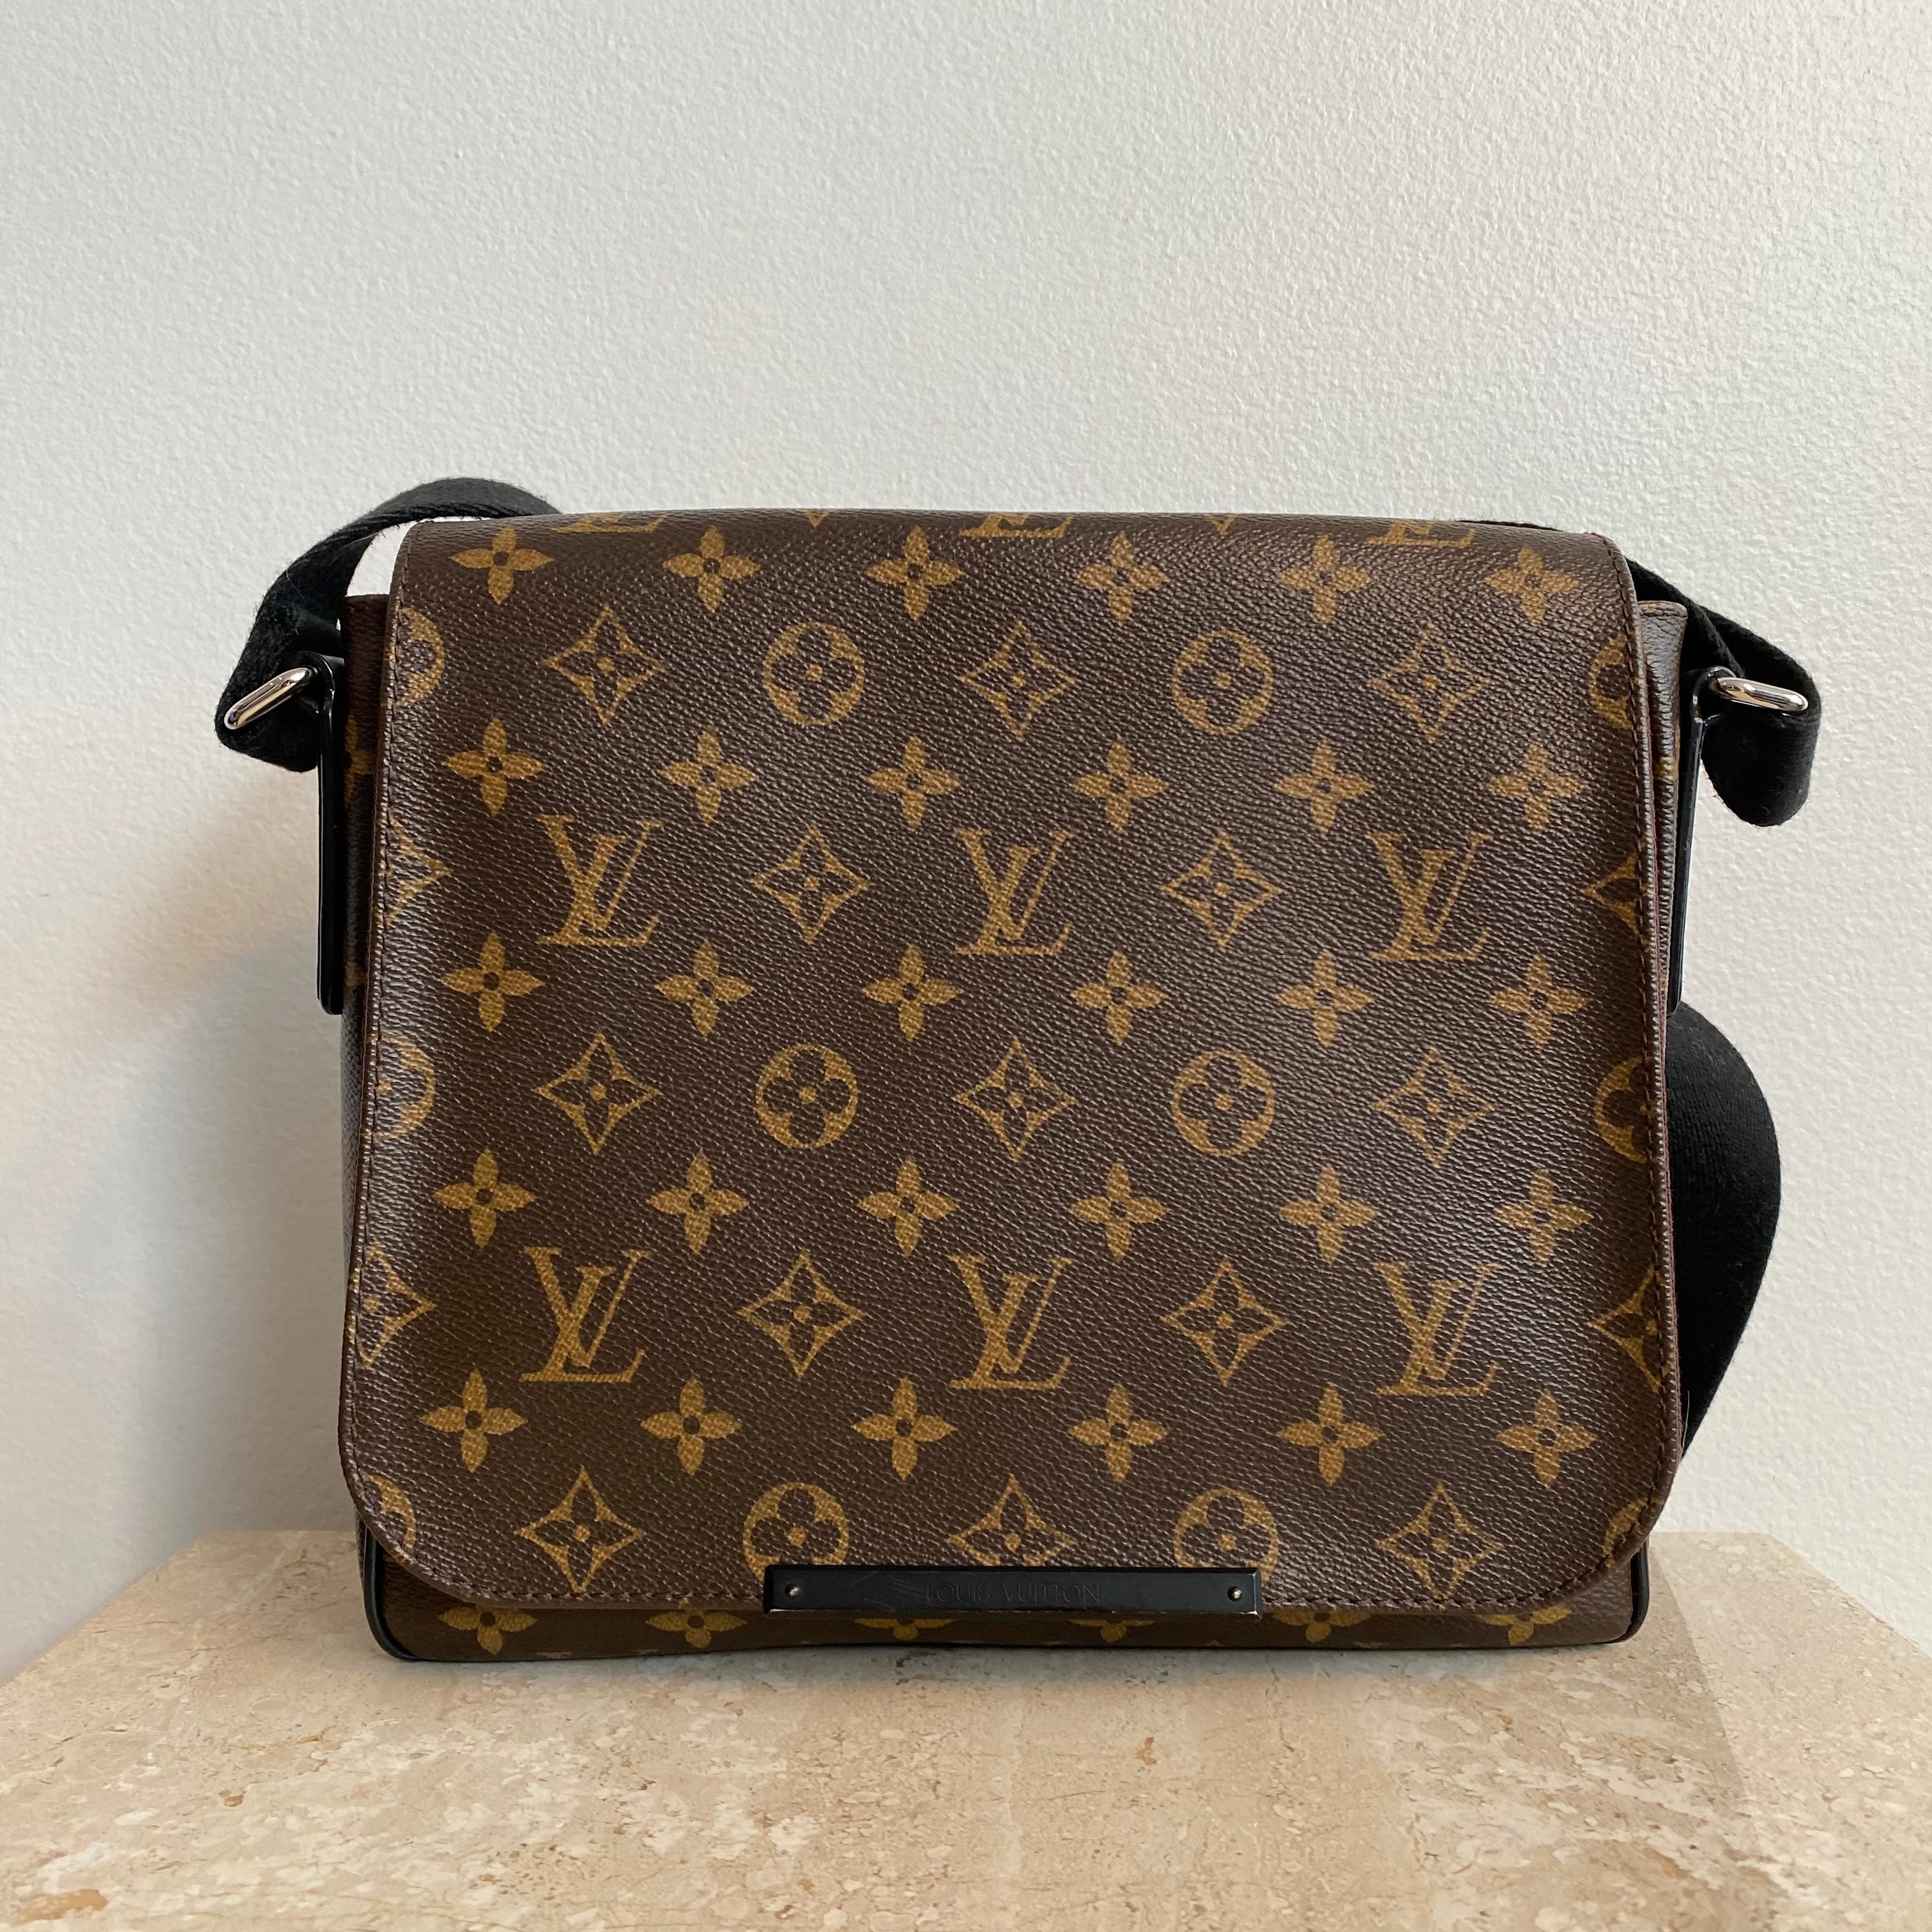 Louis Vuitton Briefcase from the 1960s  at German Shop KuSeRa